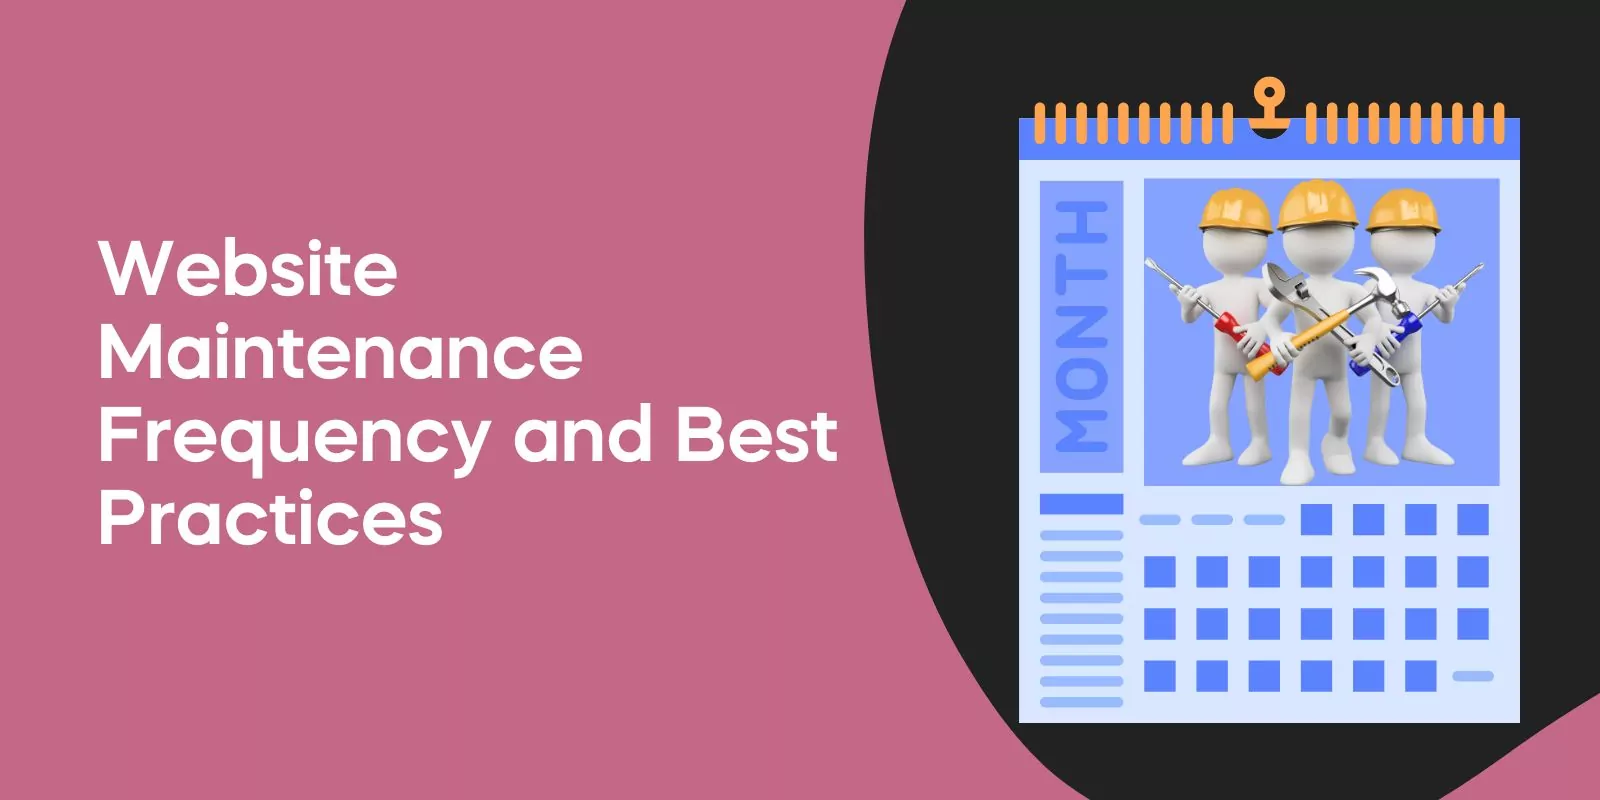 Website Maintenance Frequency and Best Practices